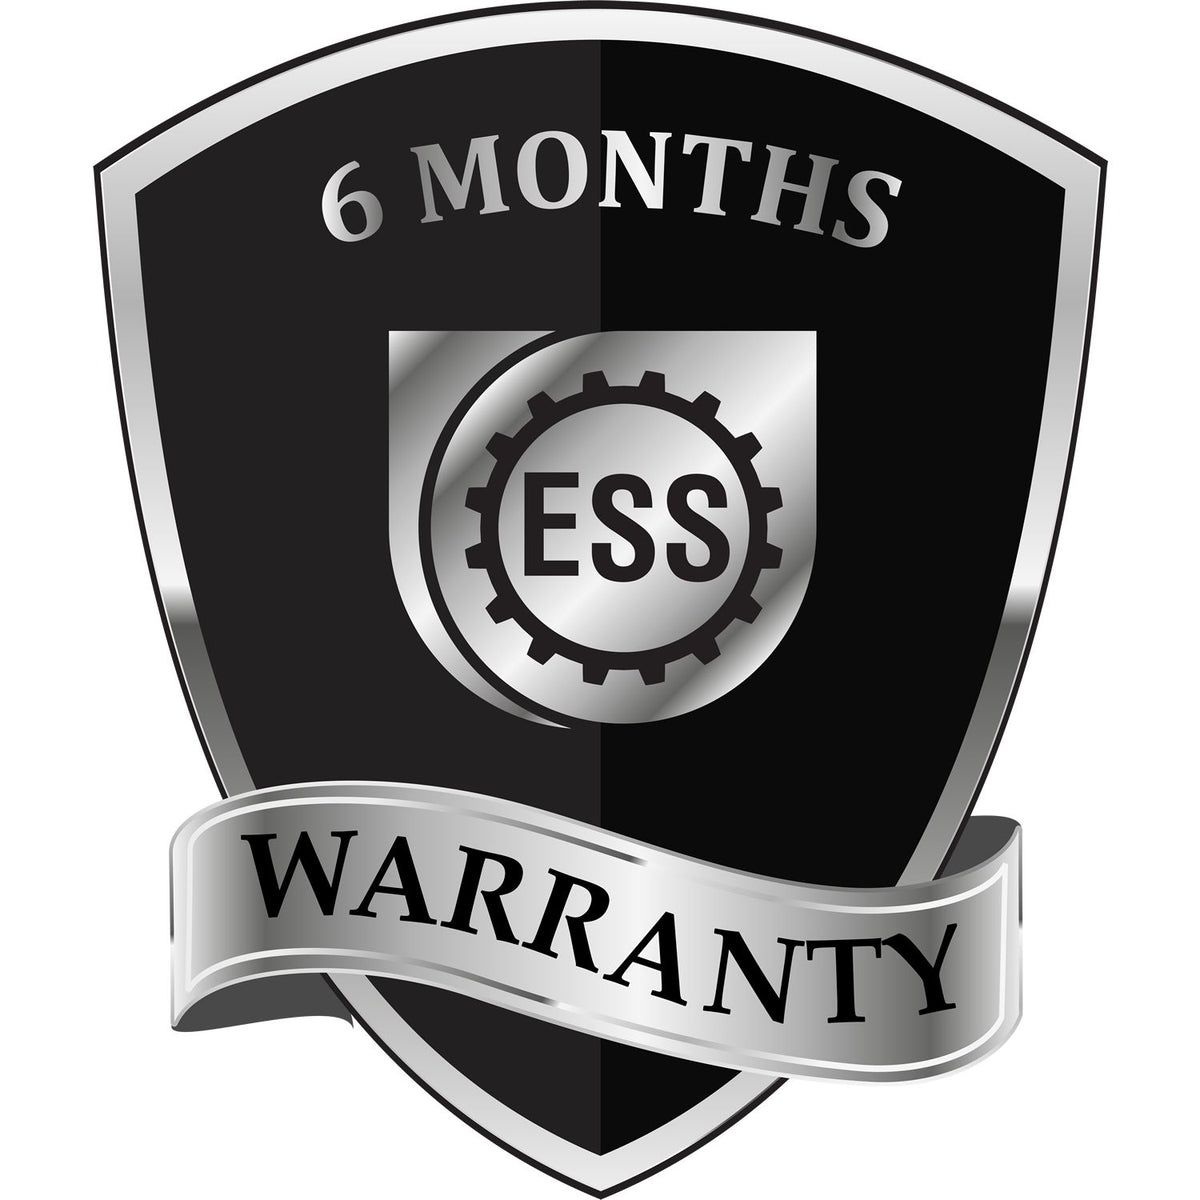 Geologist Self Inking Rubber Stamp of Seal 3006GEO 6 Month Warranty